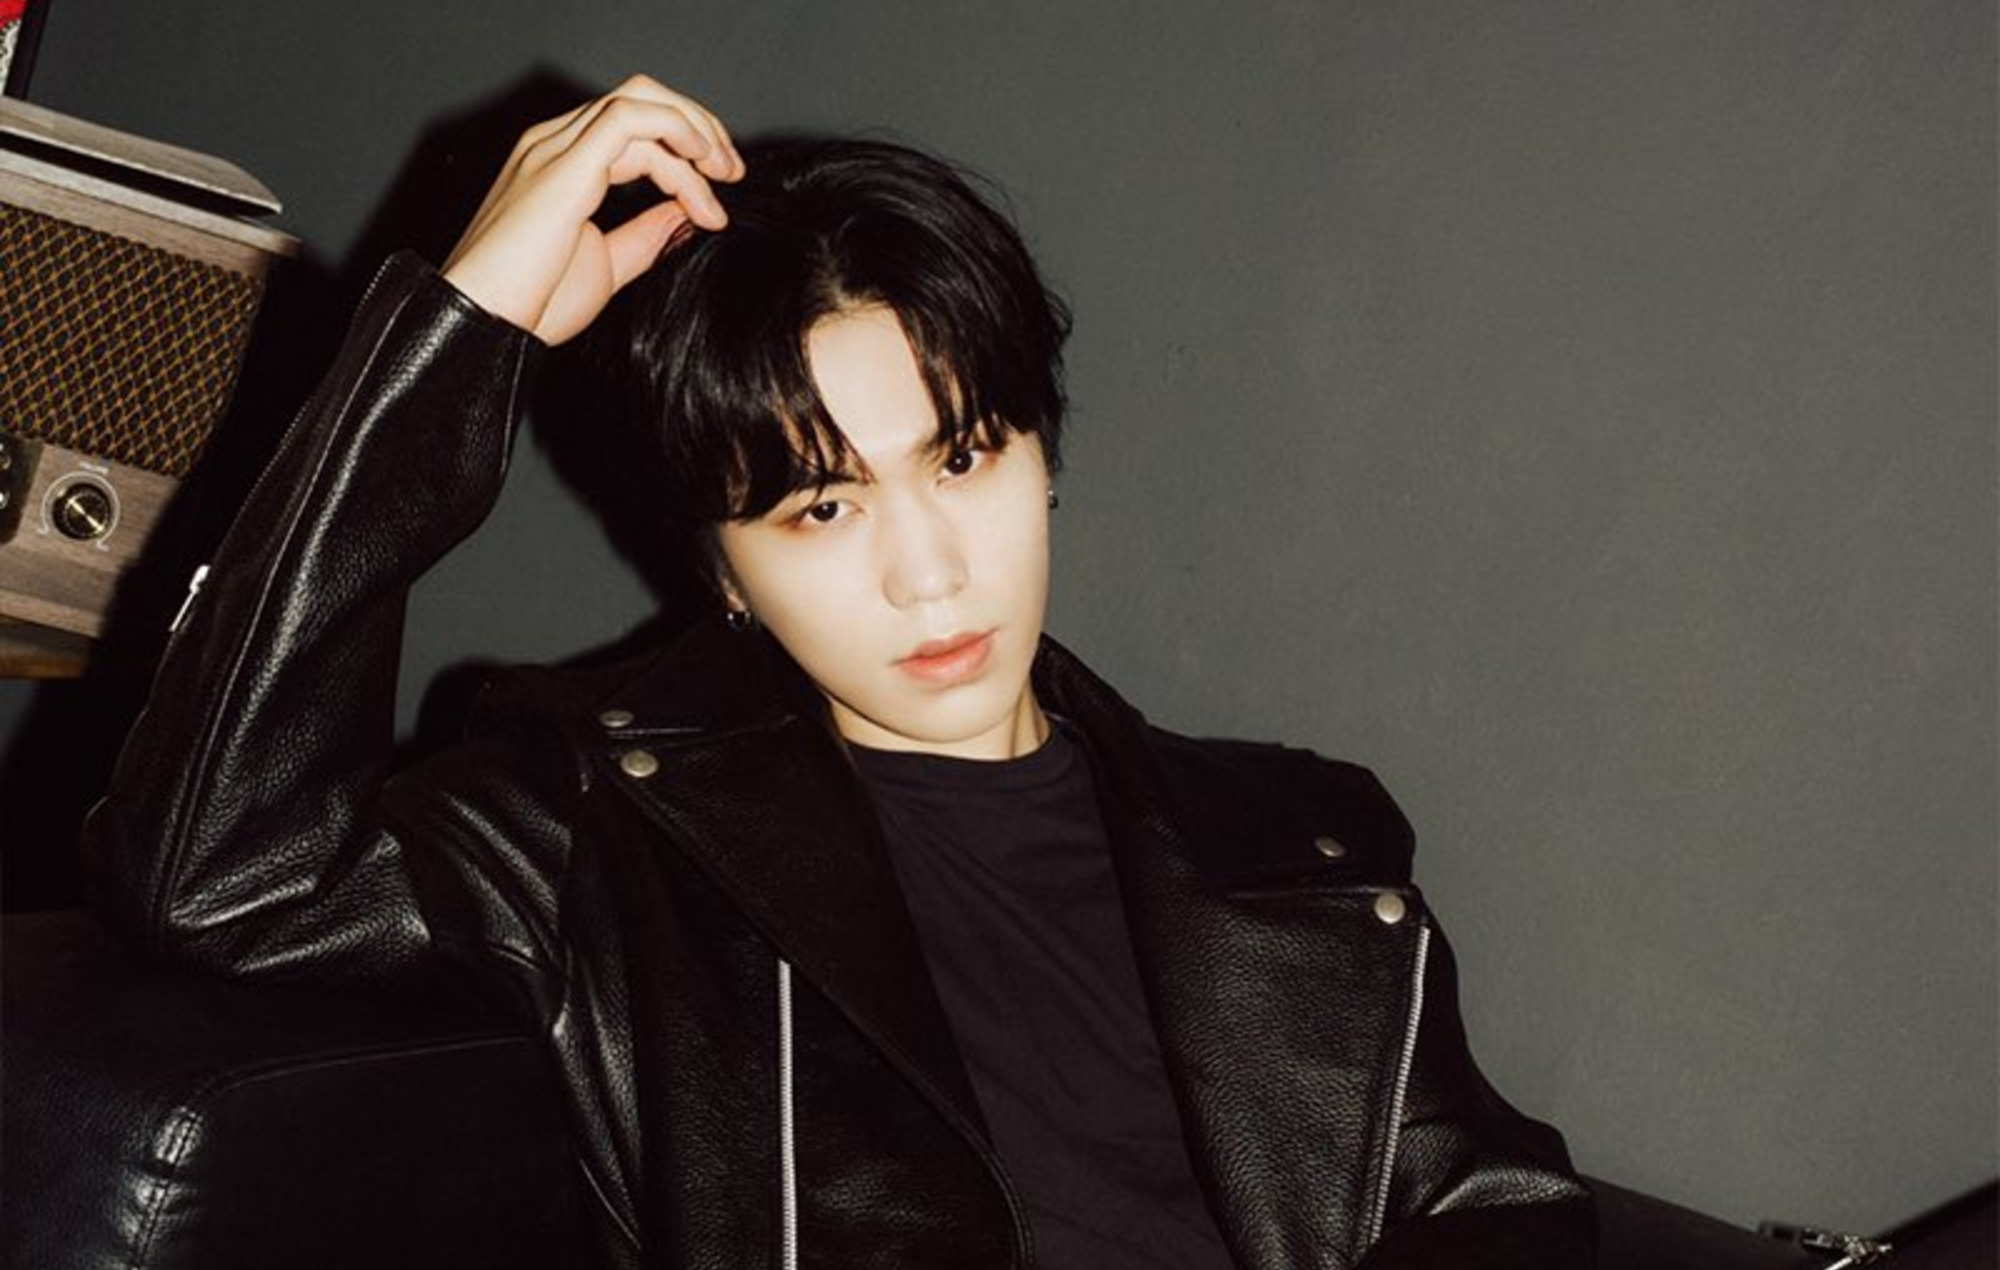 ASTRO’s Rocky announces departure from band and agency as contract expires